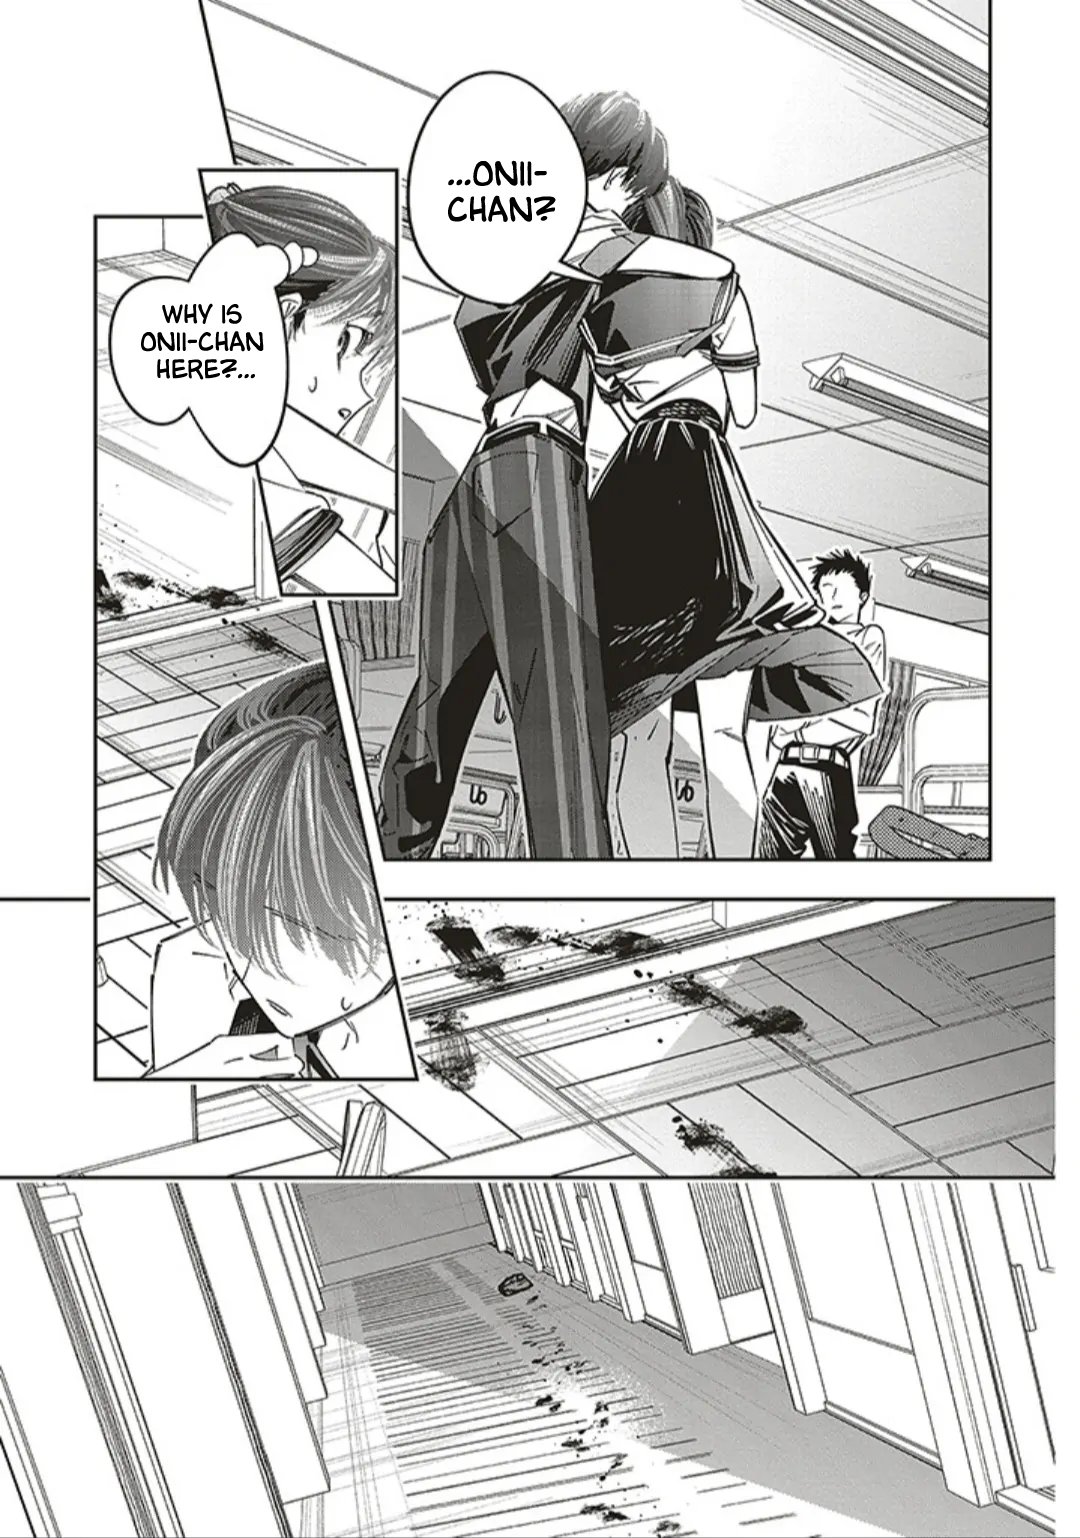 I Reincarnated As The Little Sister Of A Death Game Manga's Murder Mastermind And Failed - chapter 18 - #3